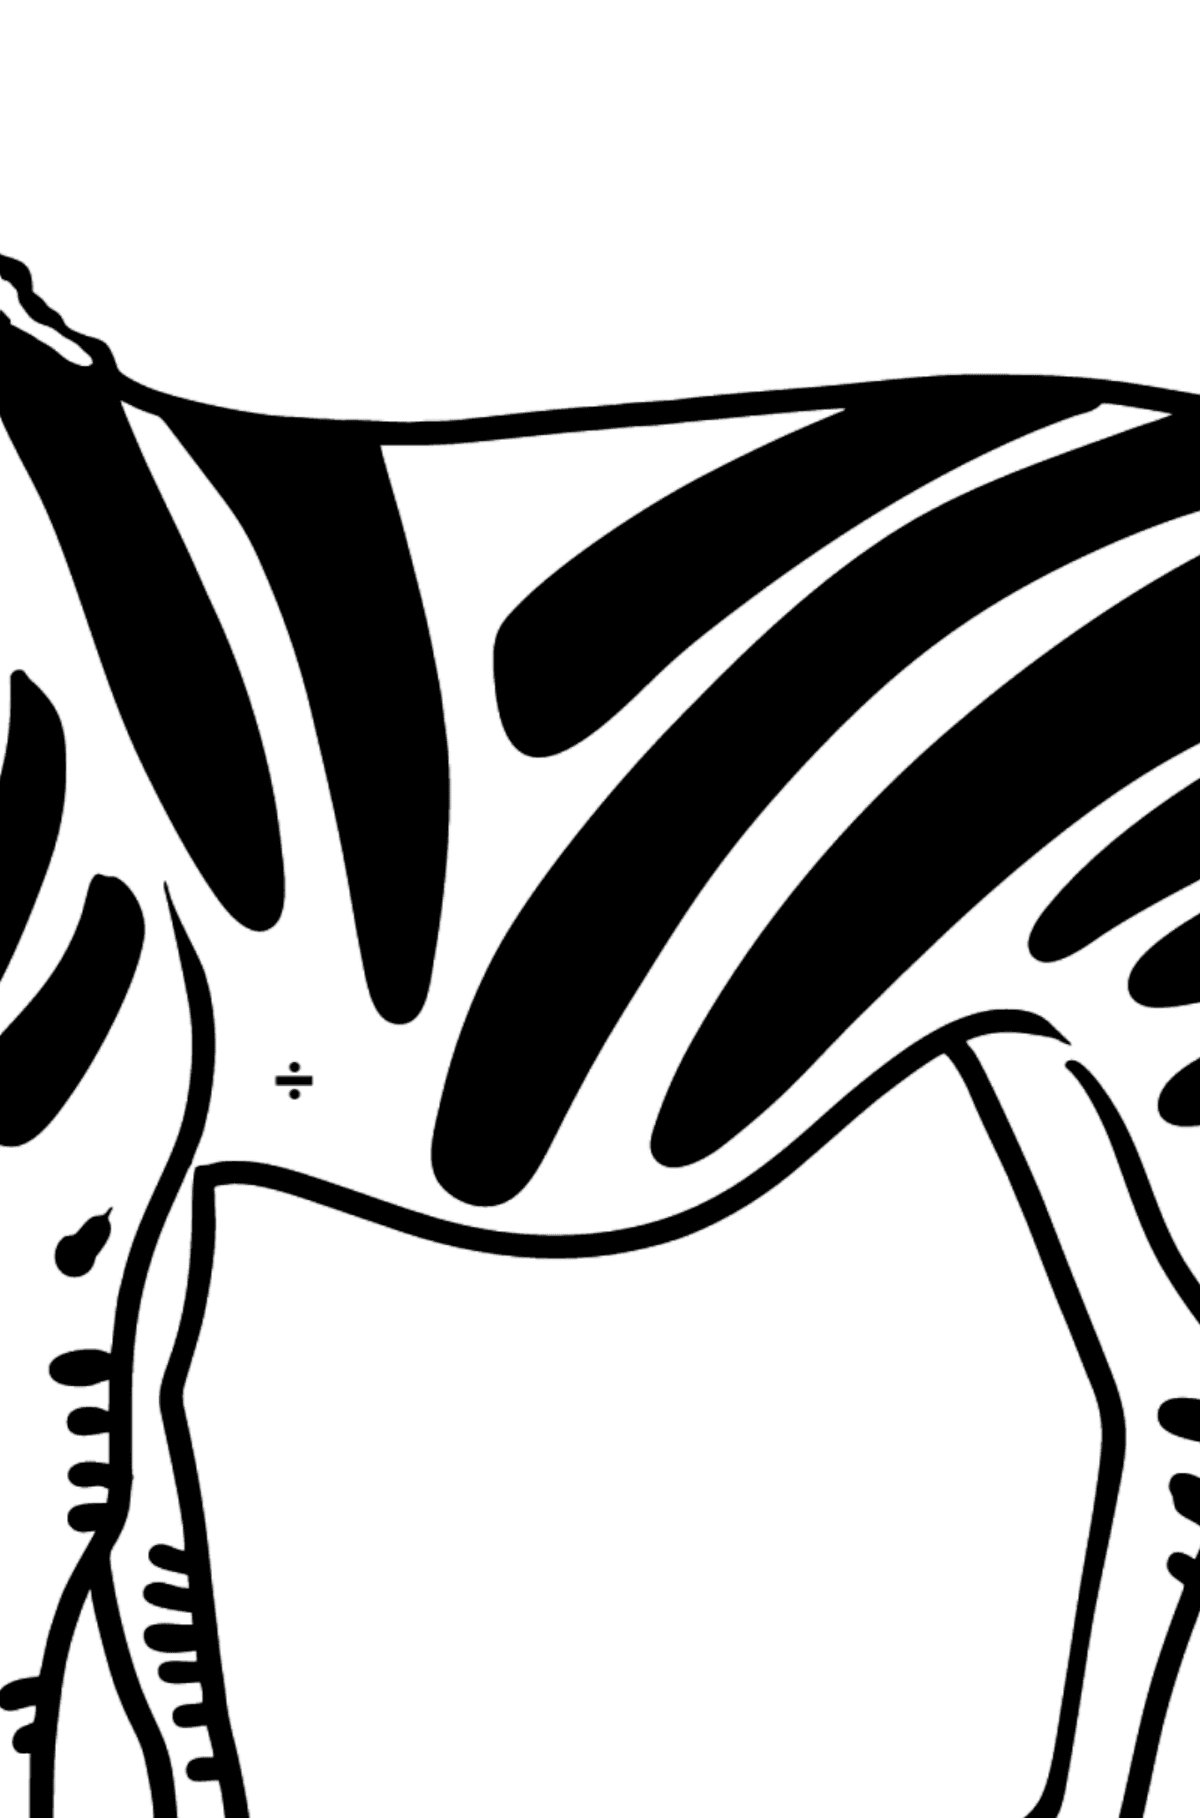 Zebra coloring page - Coloring by Symbols for Kids